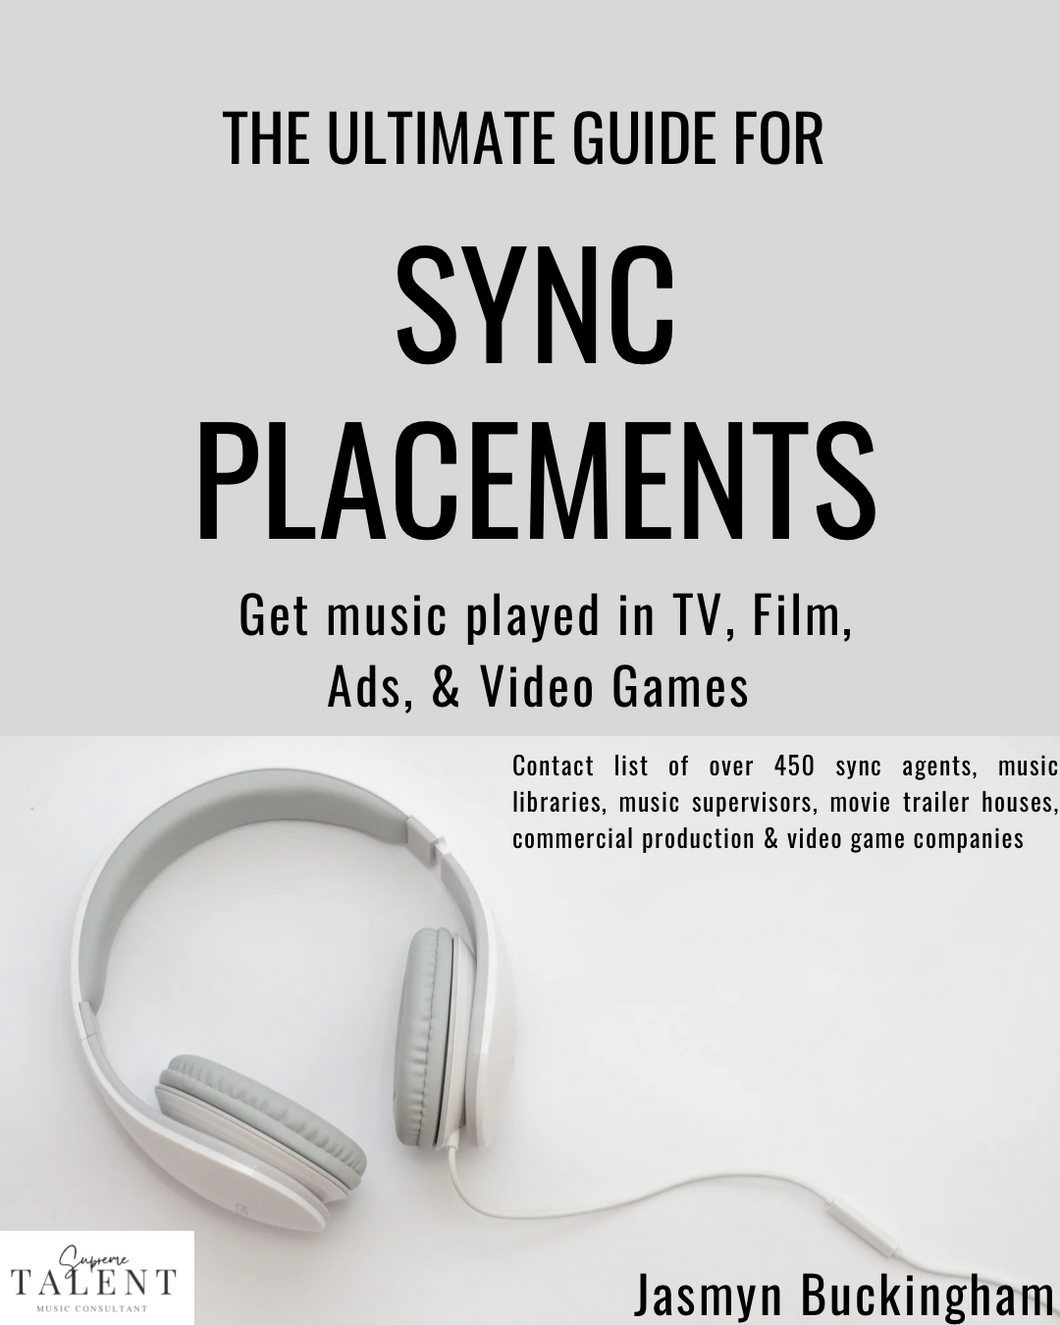 The Ultimate Guide For Sync Placements